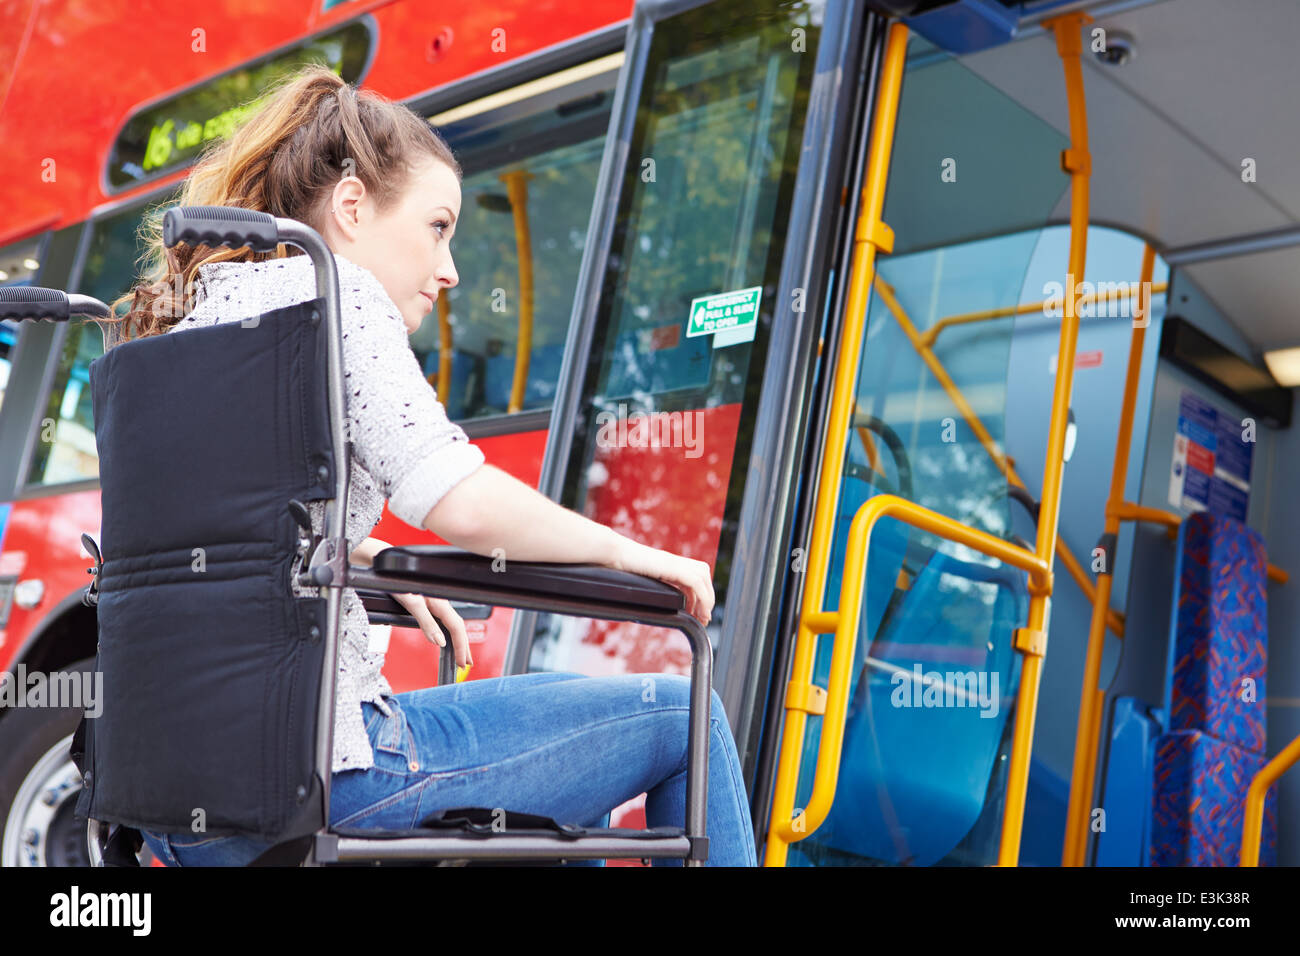 Disabled Woman In Wheelchair Boarding Bus Stock Photo